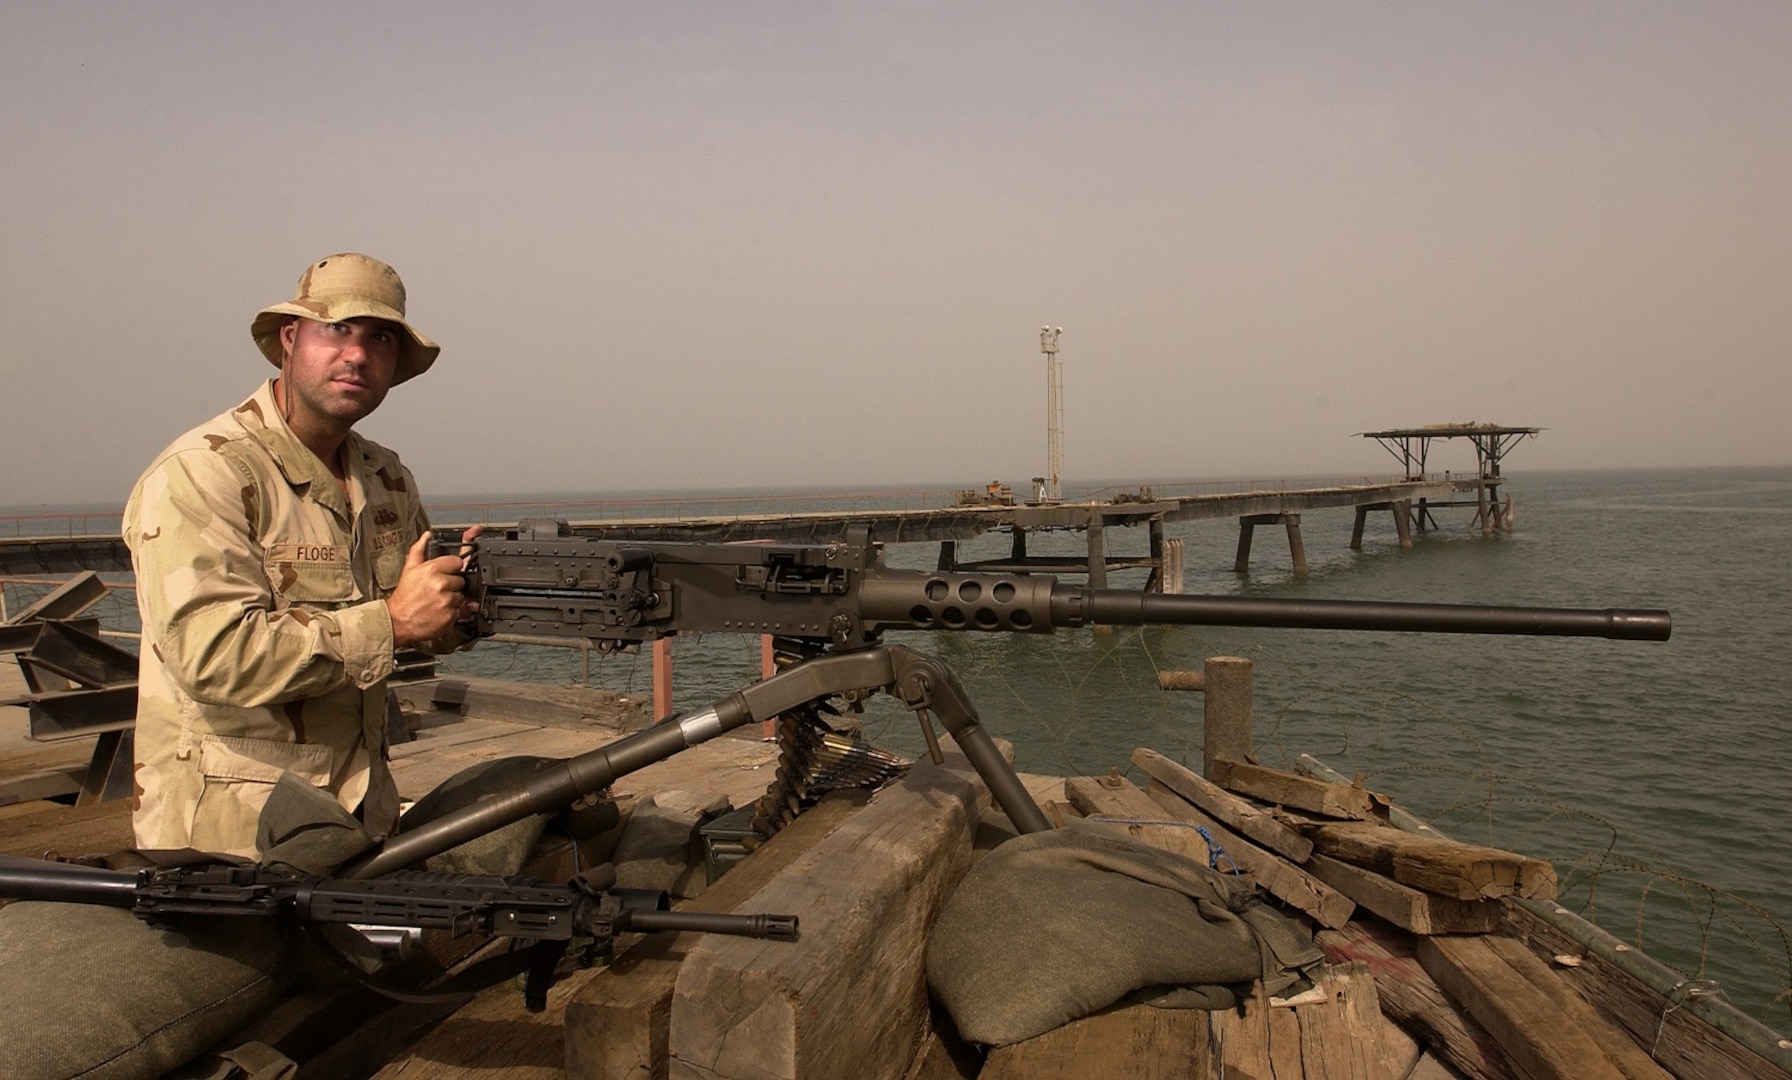 Petty Officer Second Class Paul F. Floge, a Coast Guard reservist with Coast Guard Port Security Unit 311 out of San Pedro, Ca., provides security with a .50 caliber machinegun on the Khawr al Amaya oil terminal off the coast of Iraq.
Flodge, who works full time for the Los Angeles Police Department, is one of many reservists called to active duty in support of Operation Iraqi Freedom.